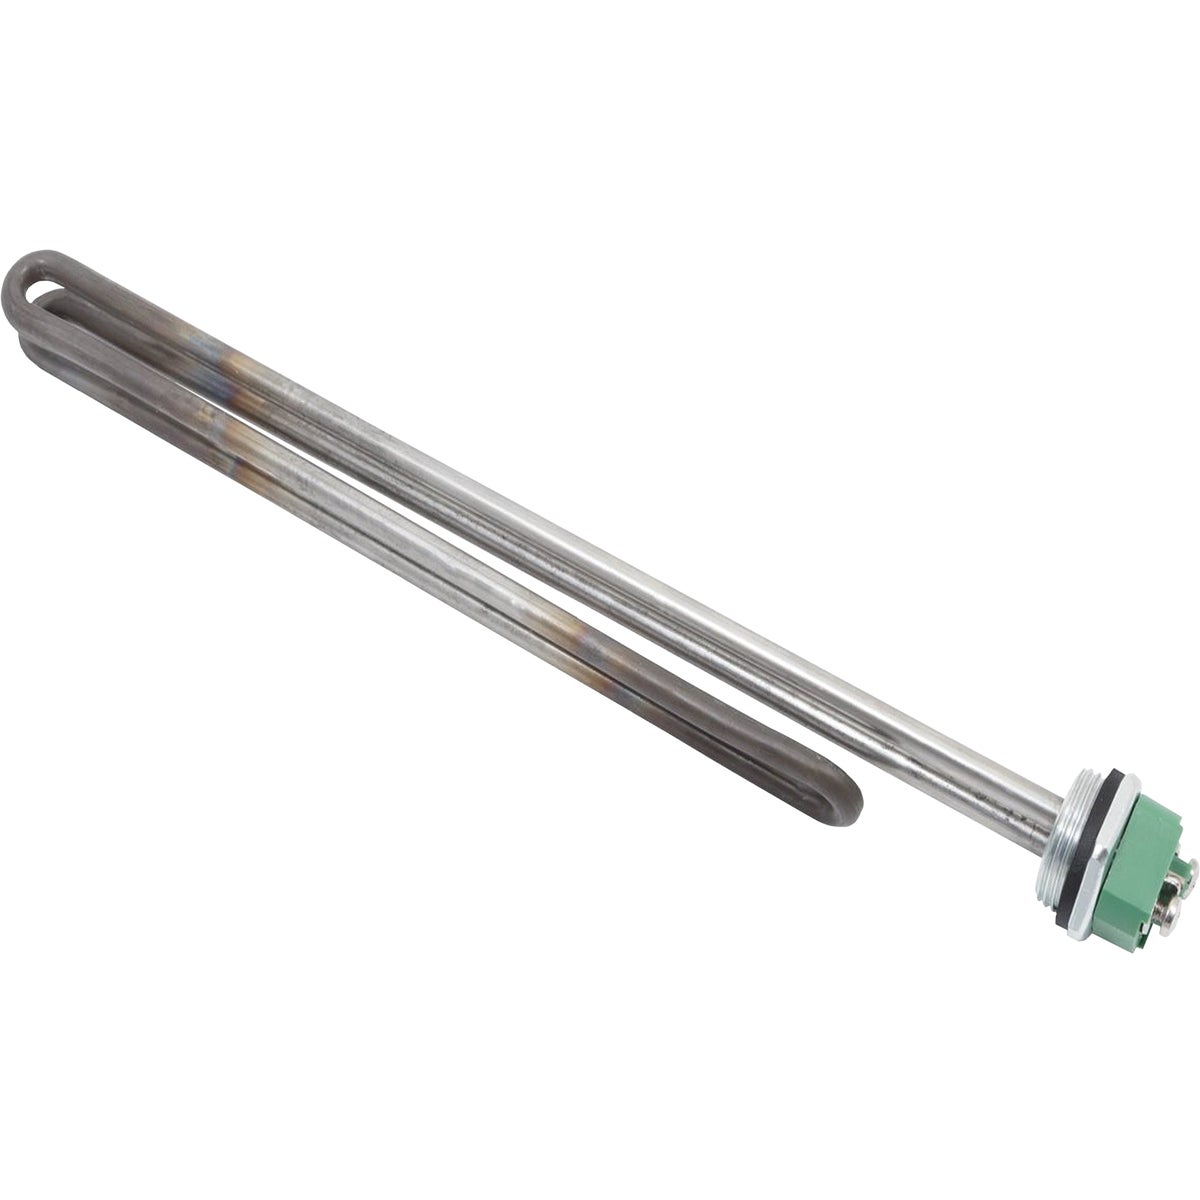 Reliance Life Long Screw In 5500W Element